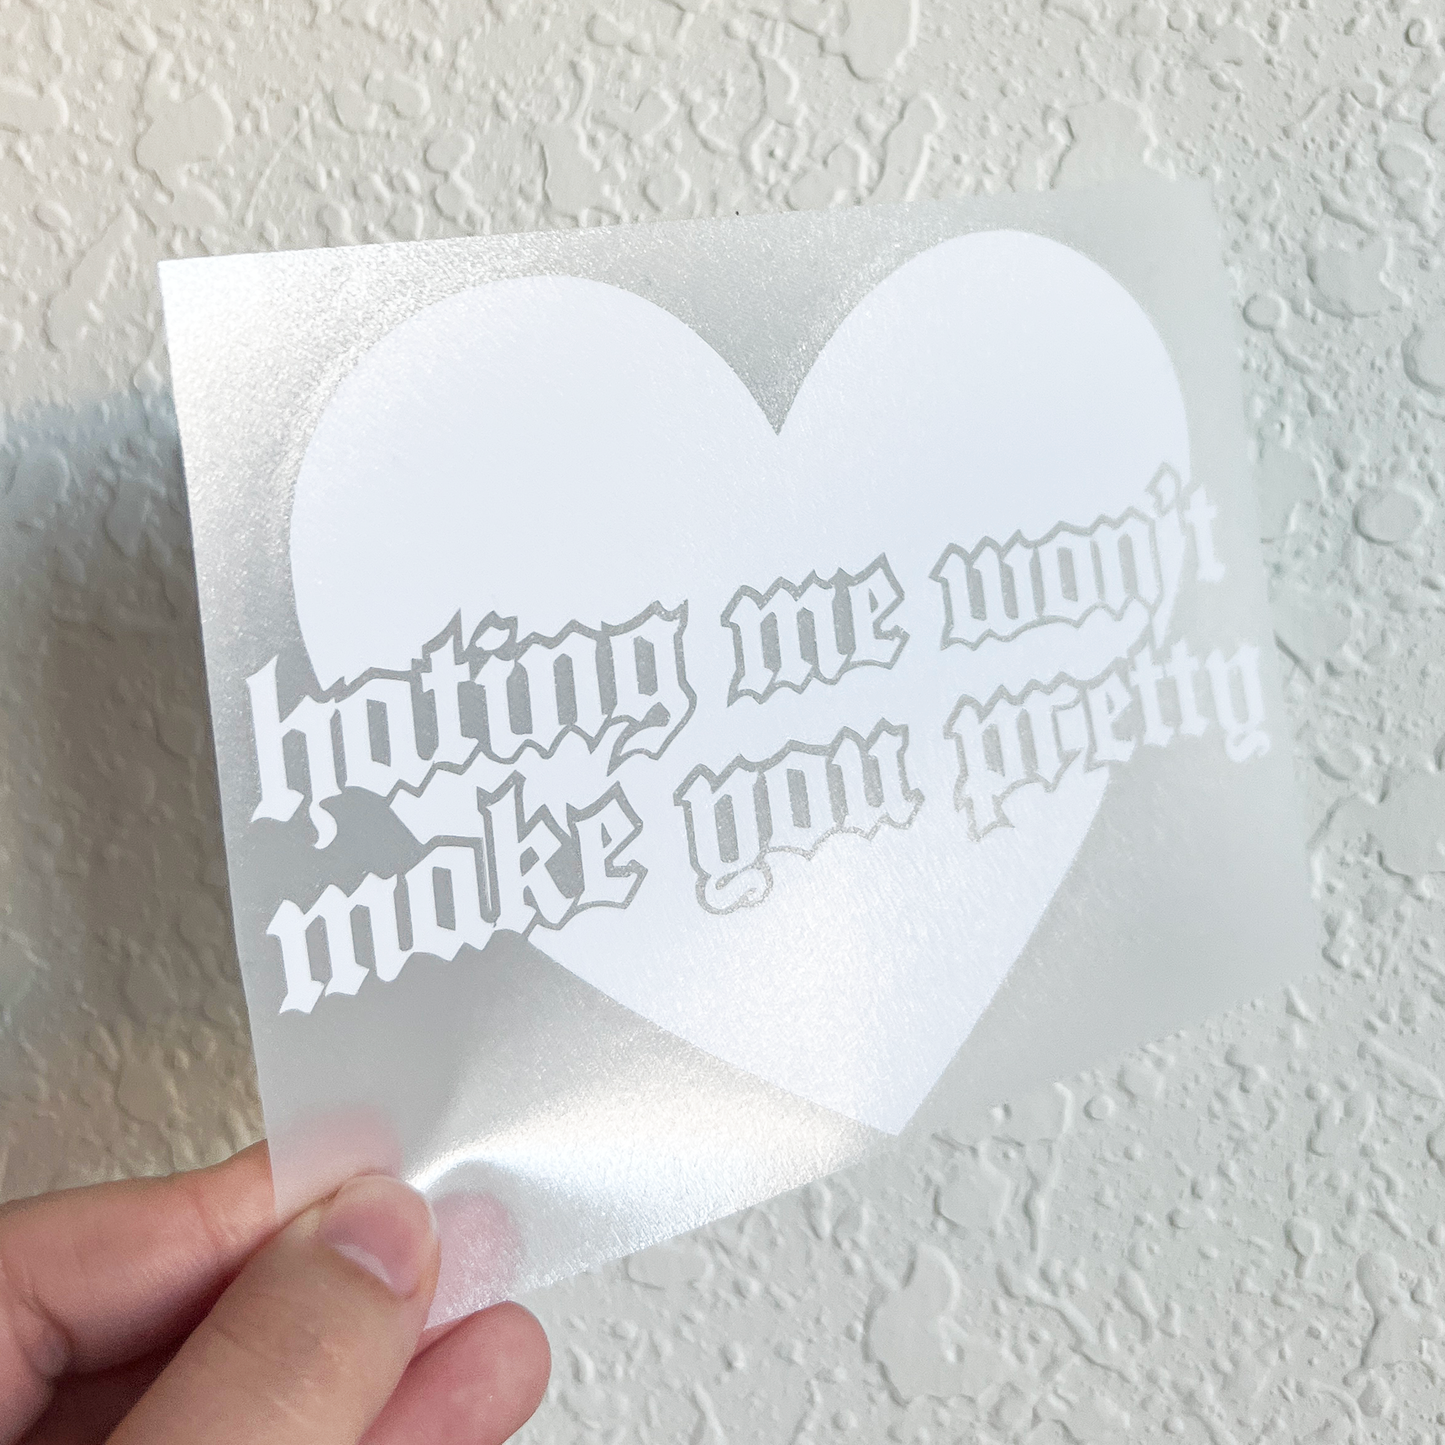 Hating Me Won't Make You Pretty Decal